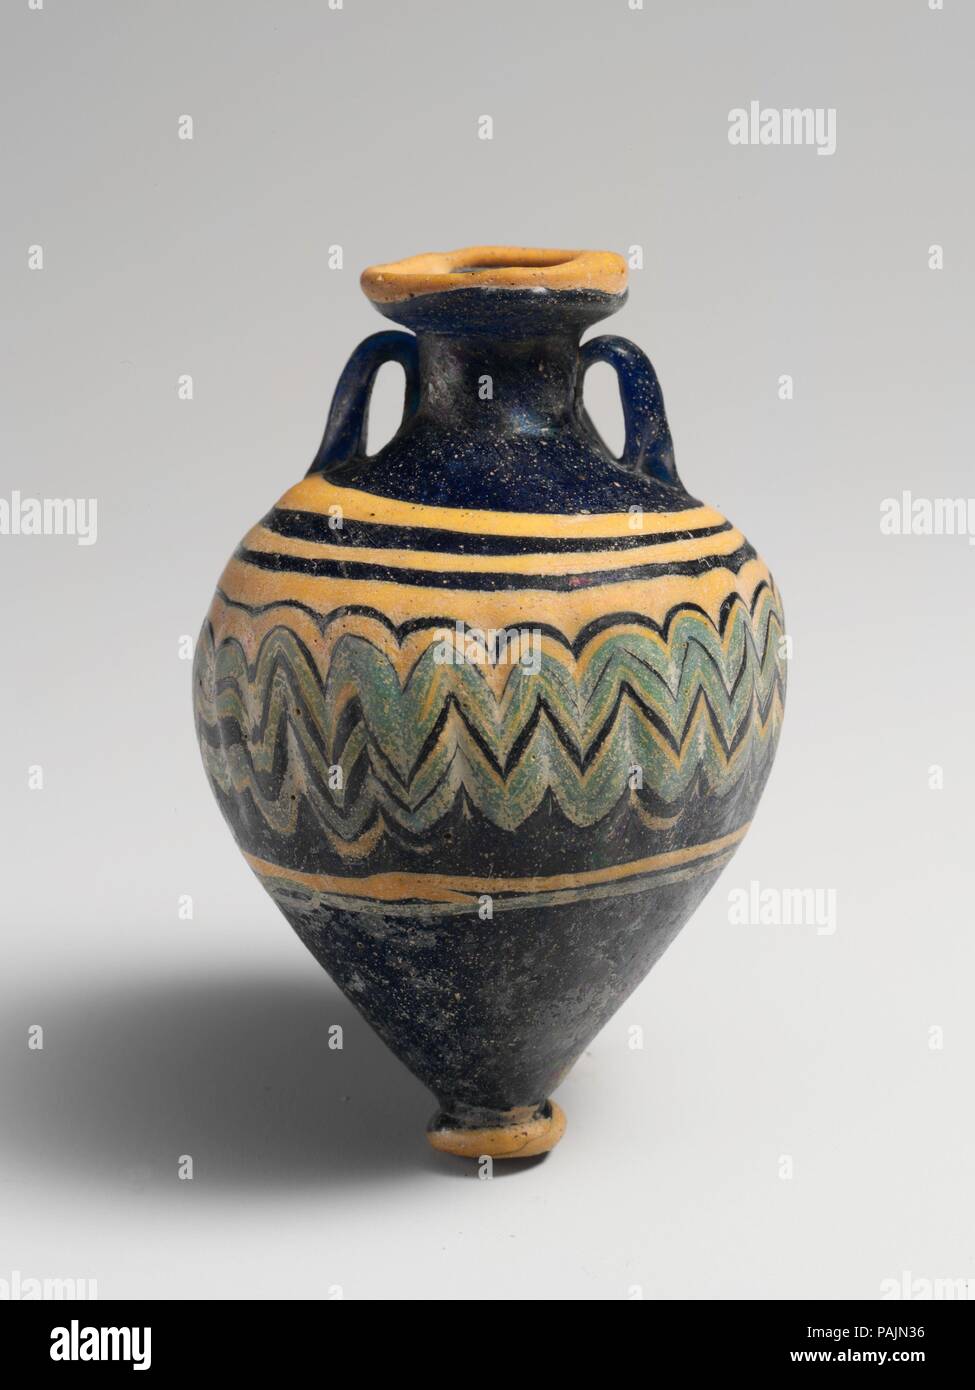 Glass amphoriskos (perfume bottle). Culture: Greek, Eastern Mediterranean. Dimensions: H.: 3 in. (7.5 cm). Date: late 6th-5th century B.C..  Translucent cobalt blue, with handles in same color; trails in opaque yellow and opaque turquoise blue.  Deeply inward-sloping rim-disk; cylindrical neck; broad sloping shoulder; top-shaped body; circular base-knob with flat bottom; two vertical strap handles applied to shoulder, drawn up and in, and pressed onto neck.  A thick yellow trail attached at edge of rim-disk; another thick yellow trail applied on shoulder, wound in a spiral, then tooled into an Stock Photo